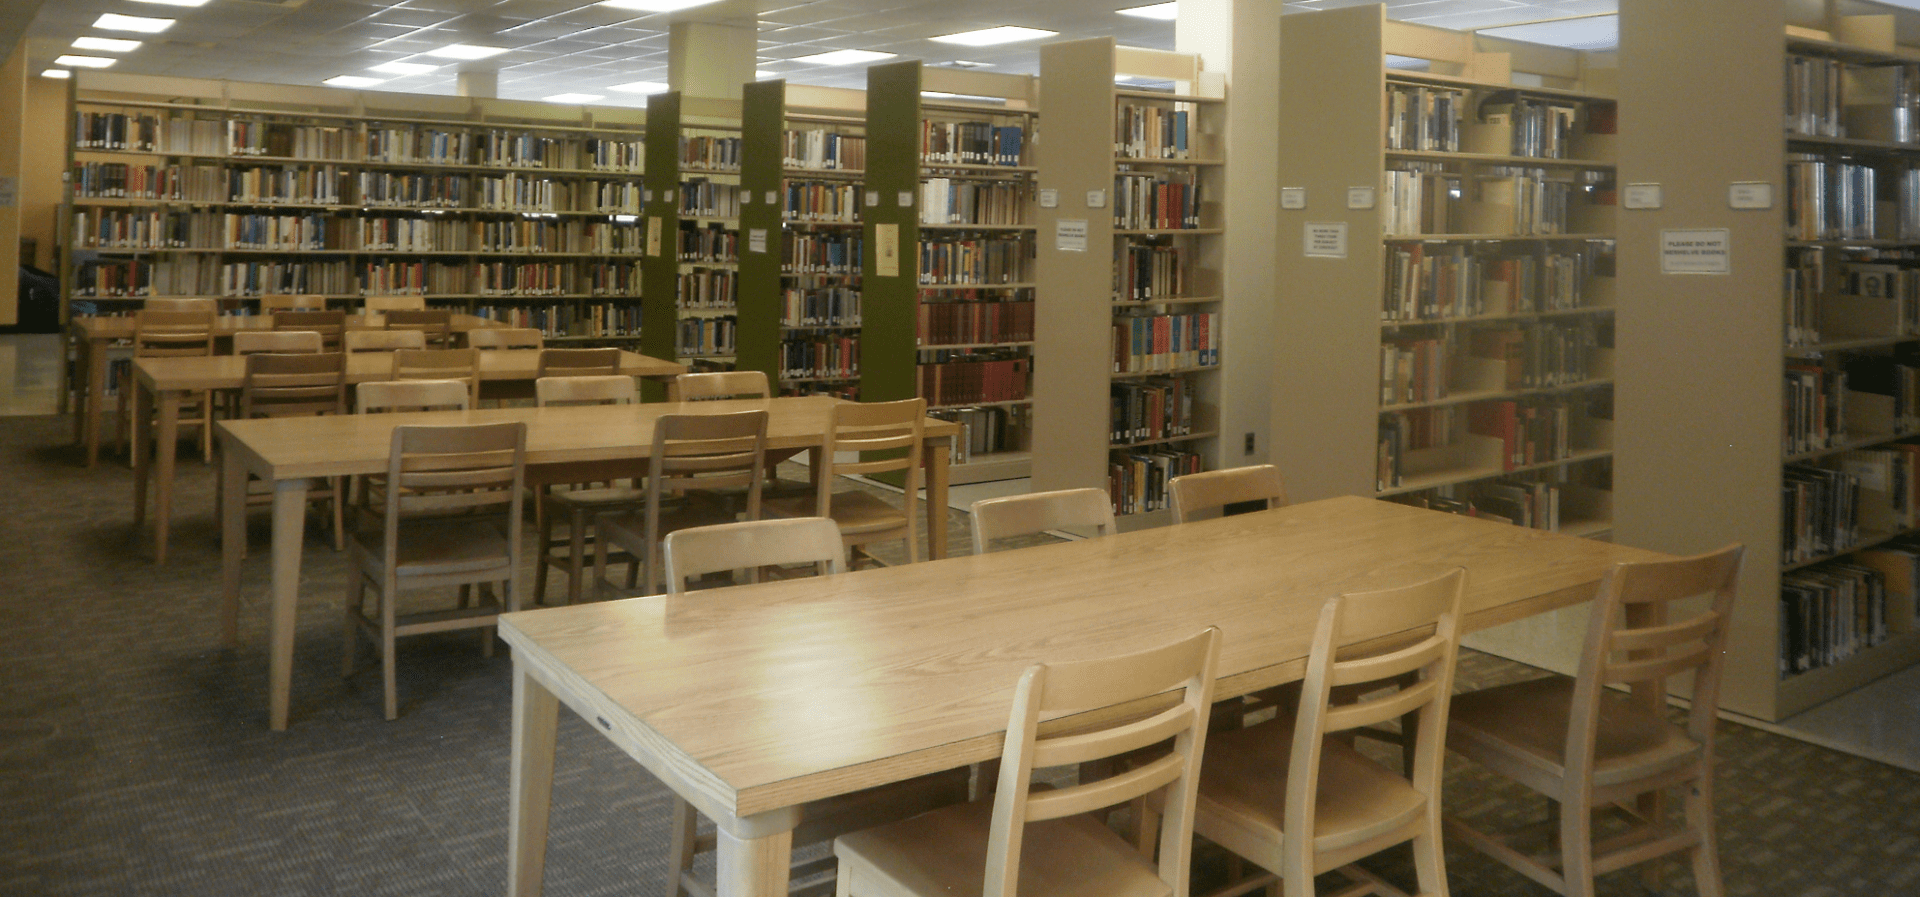 Library Tables and chairs